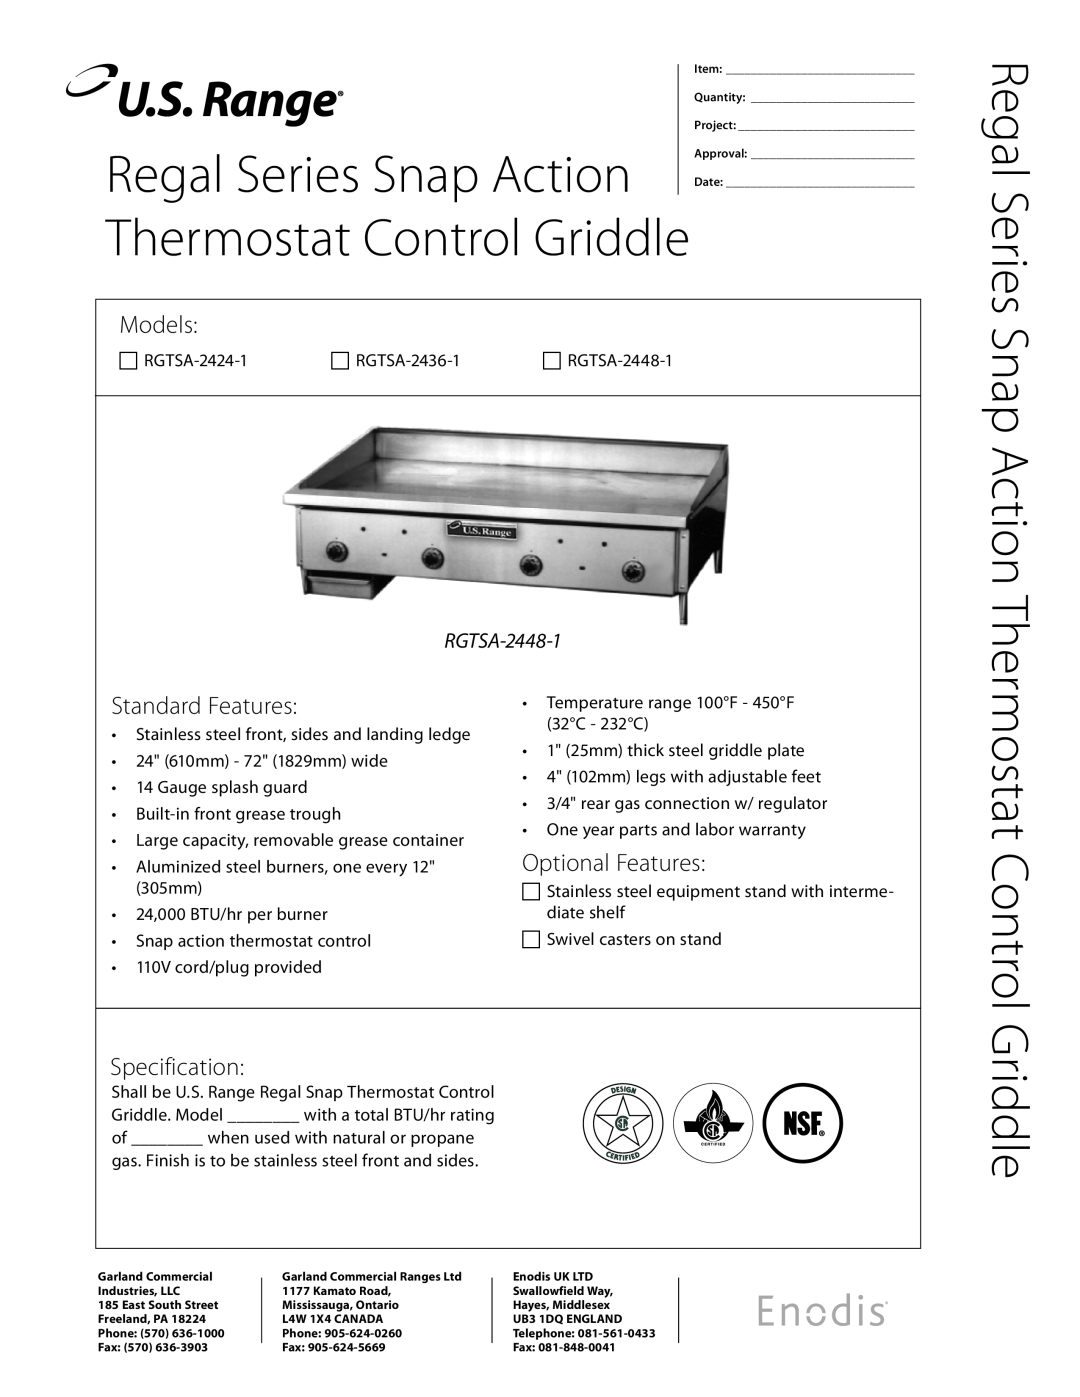 Garland RGTSA-2424-1 specifications Regal Series Snap Action, Thermostat Control Griddle, Models, Standard Features 